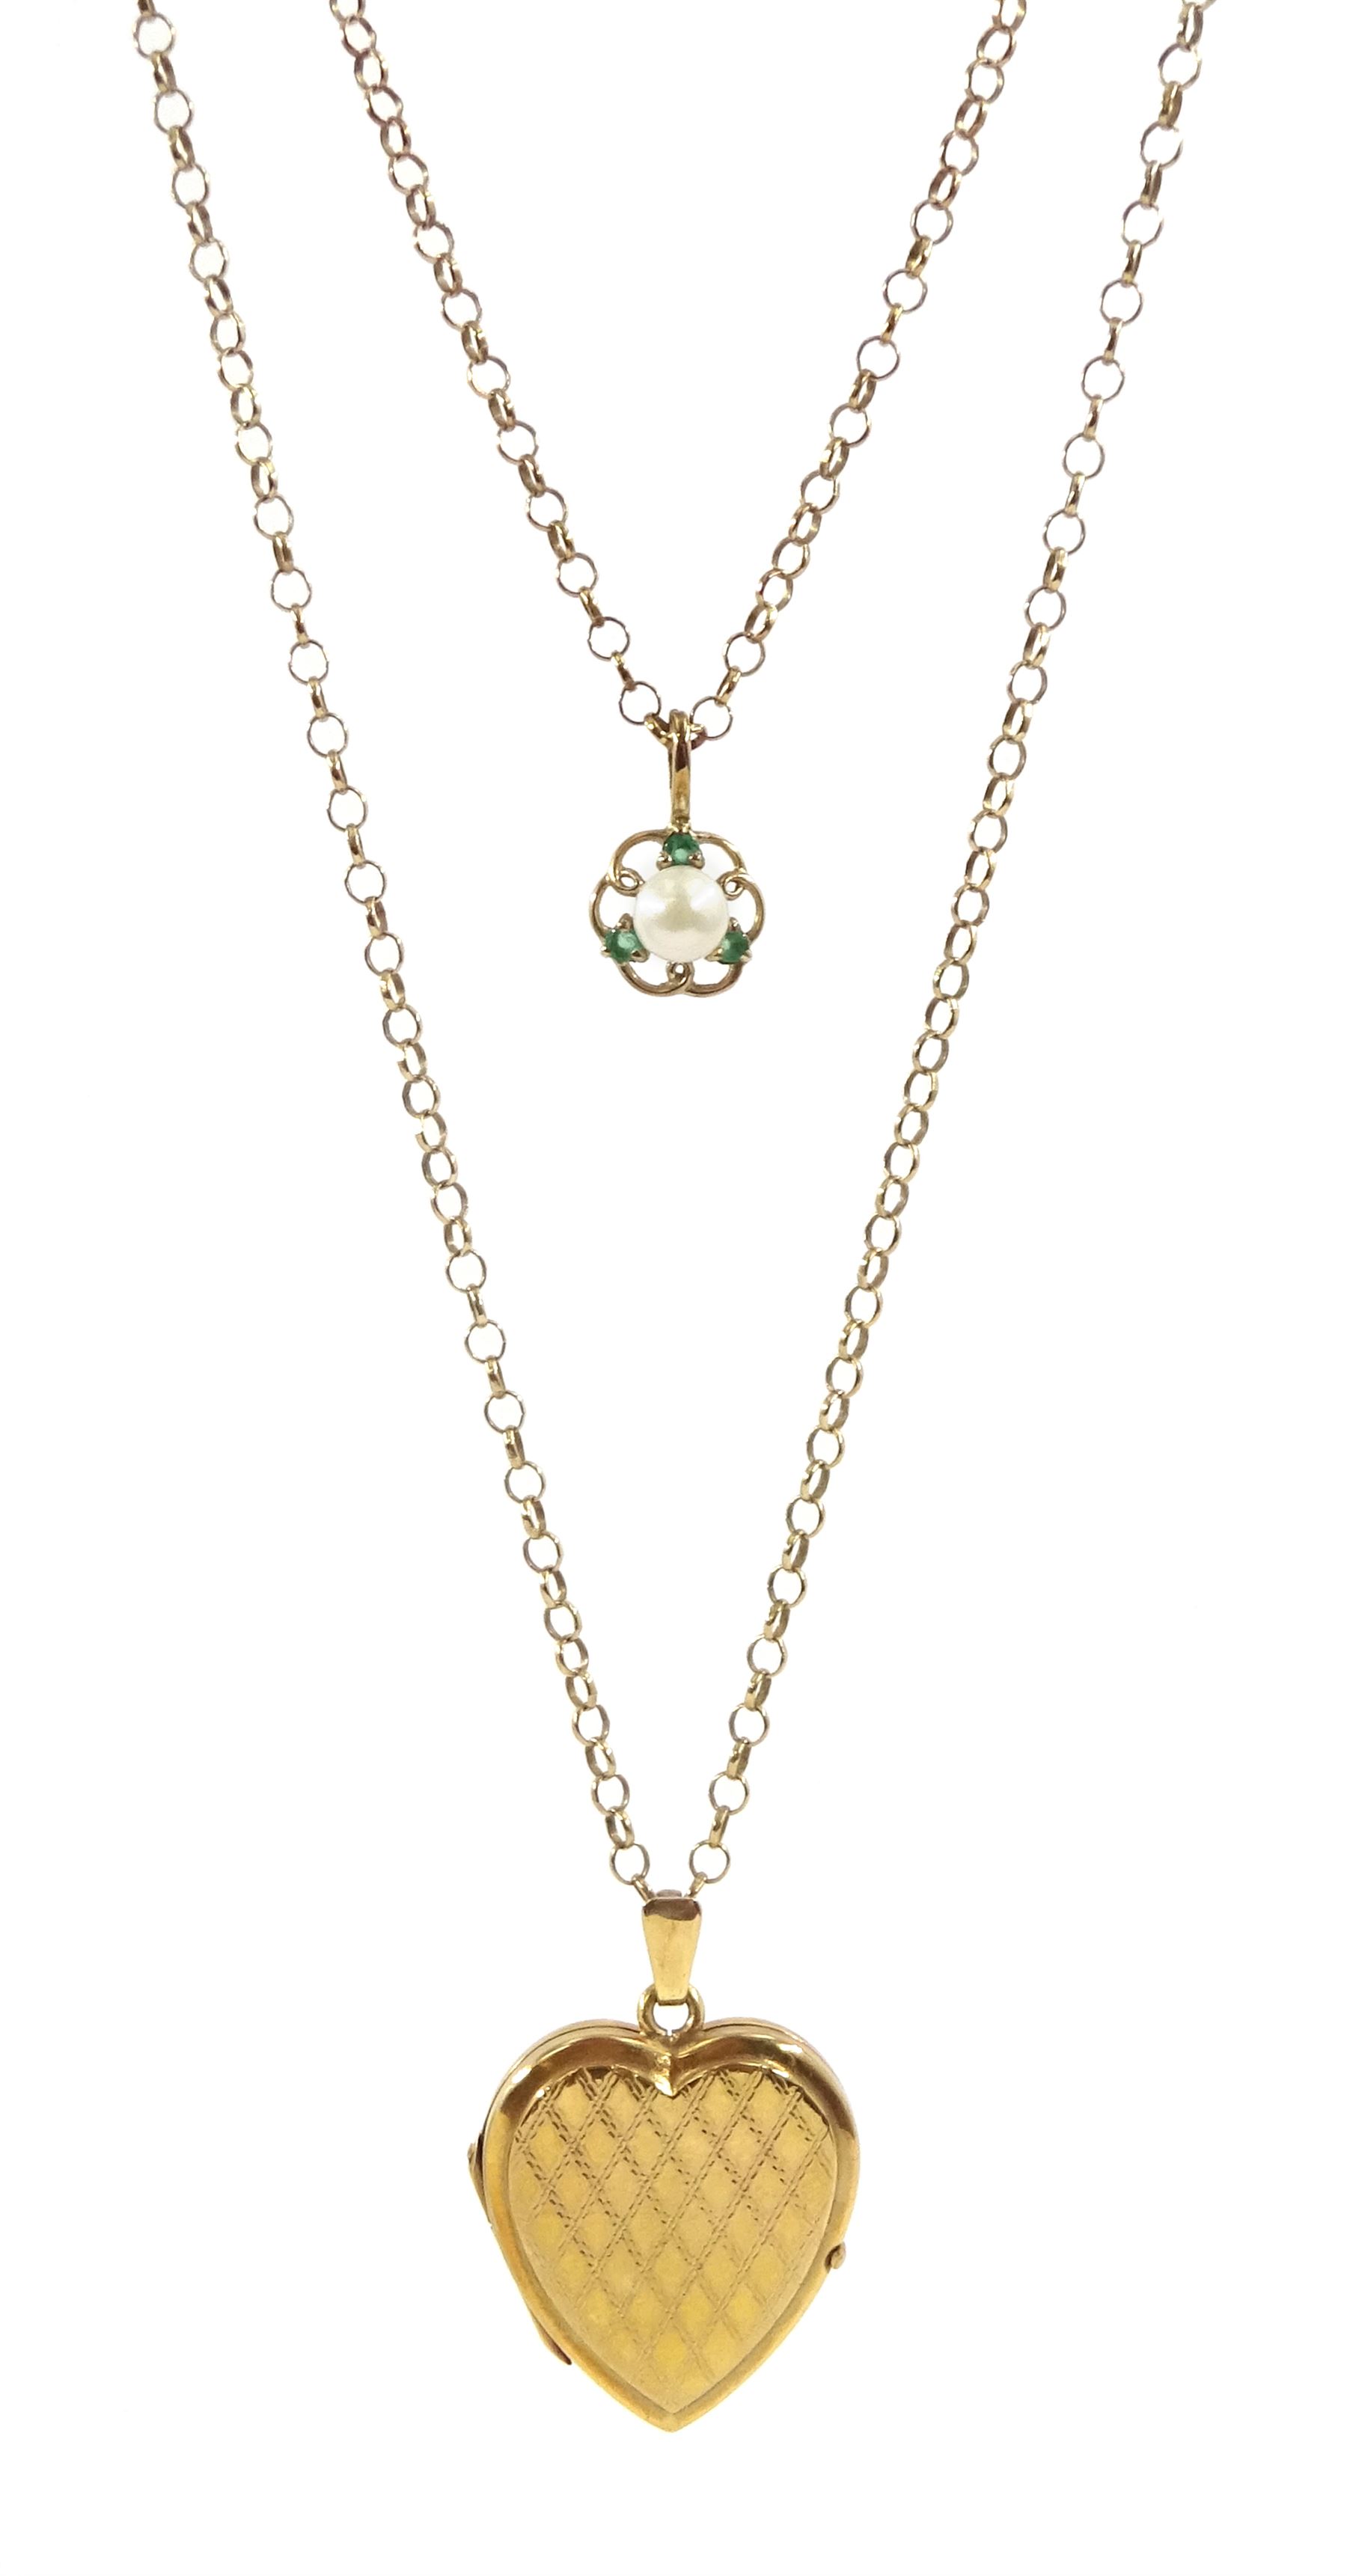 9ct gold pearl and emerald pendant necklace and a 9ct gold heart locket pendant necklace